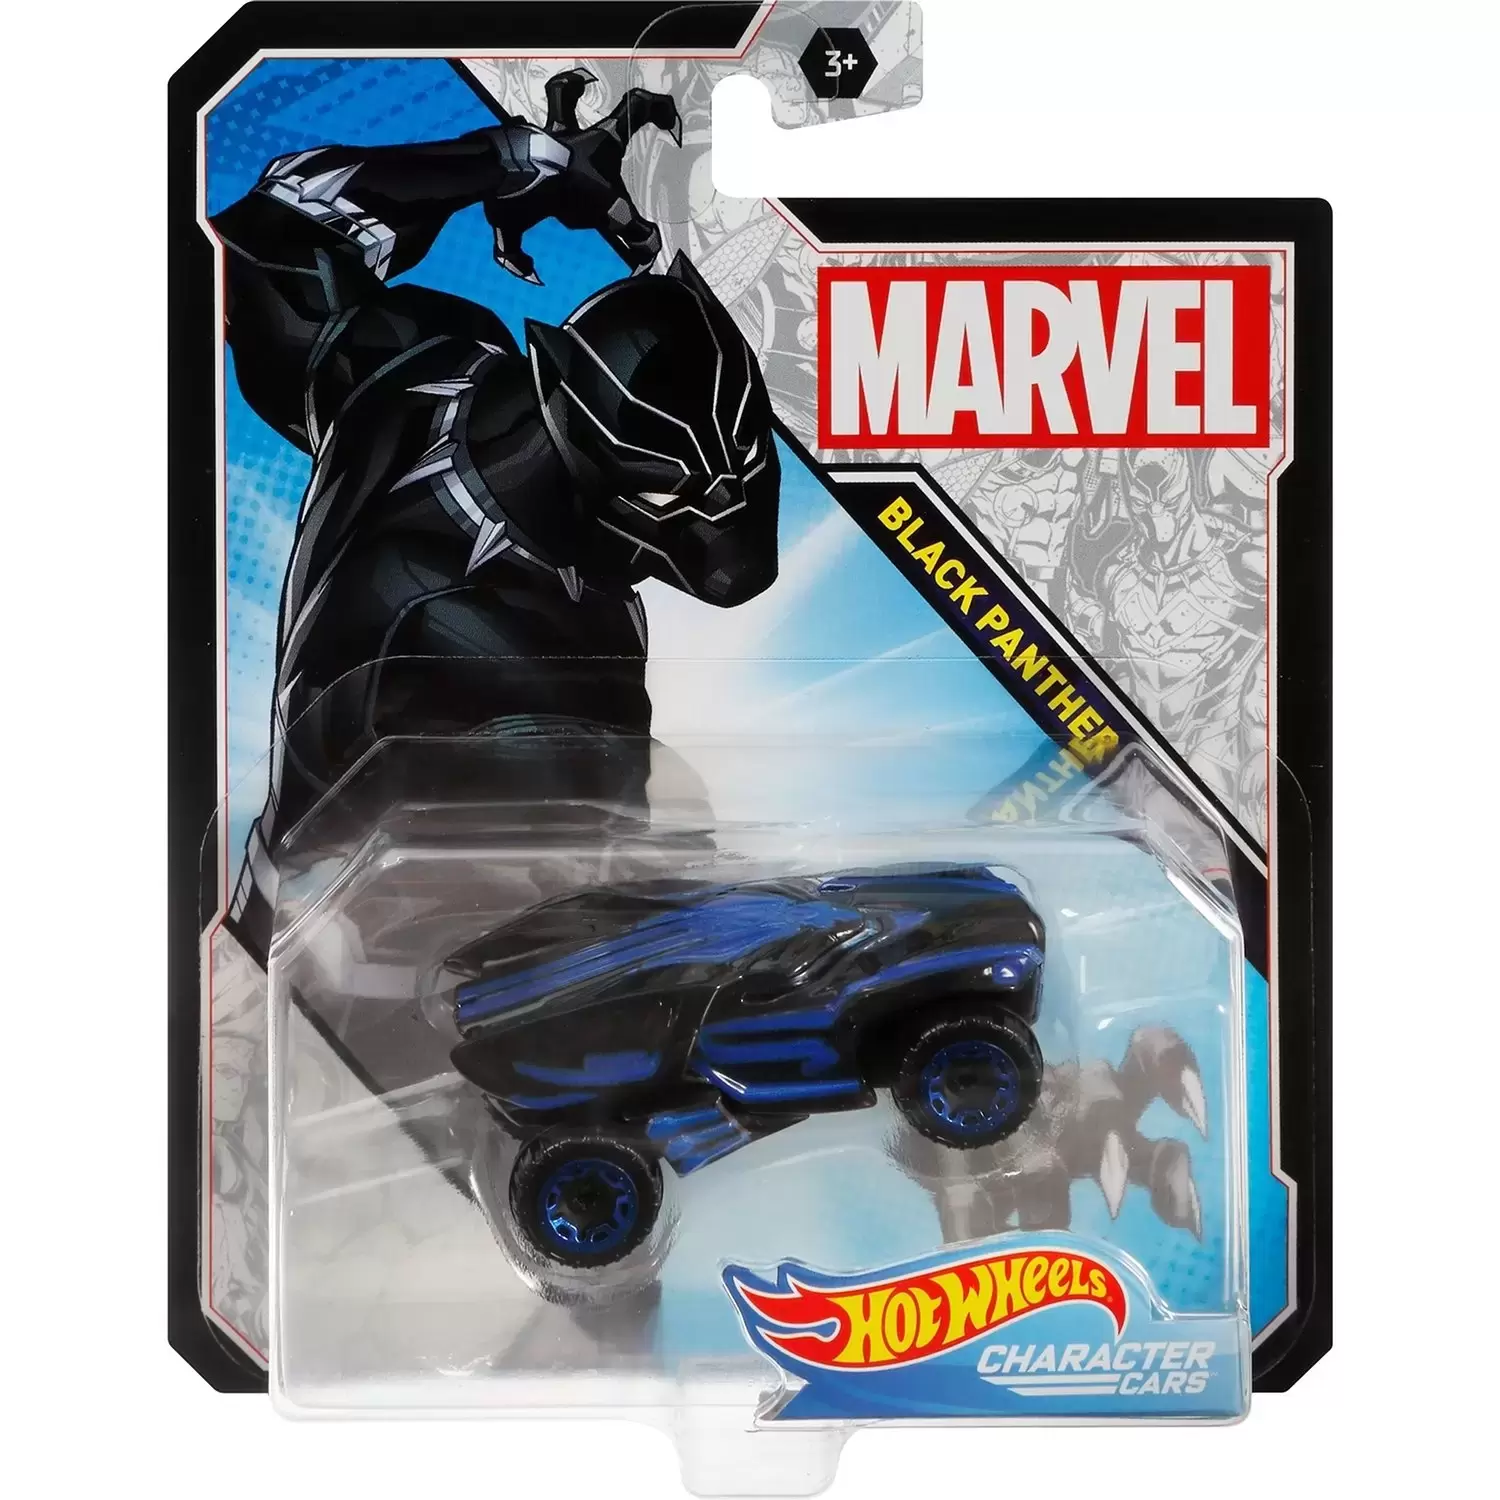 Marvel Character Cars - Black Panther